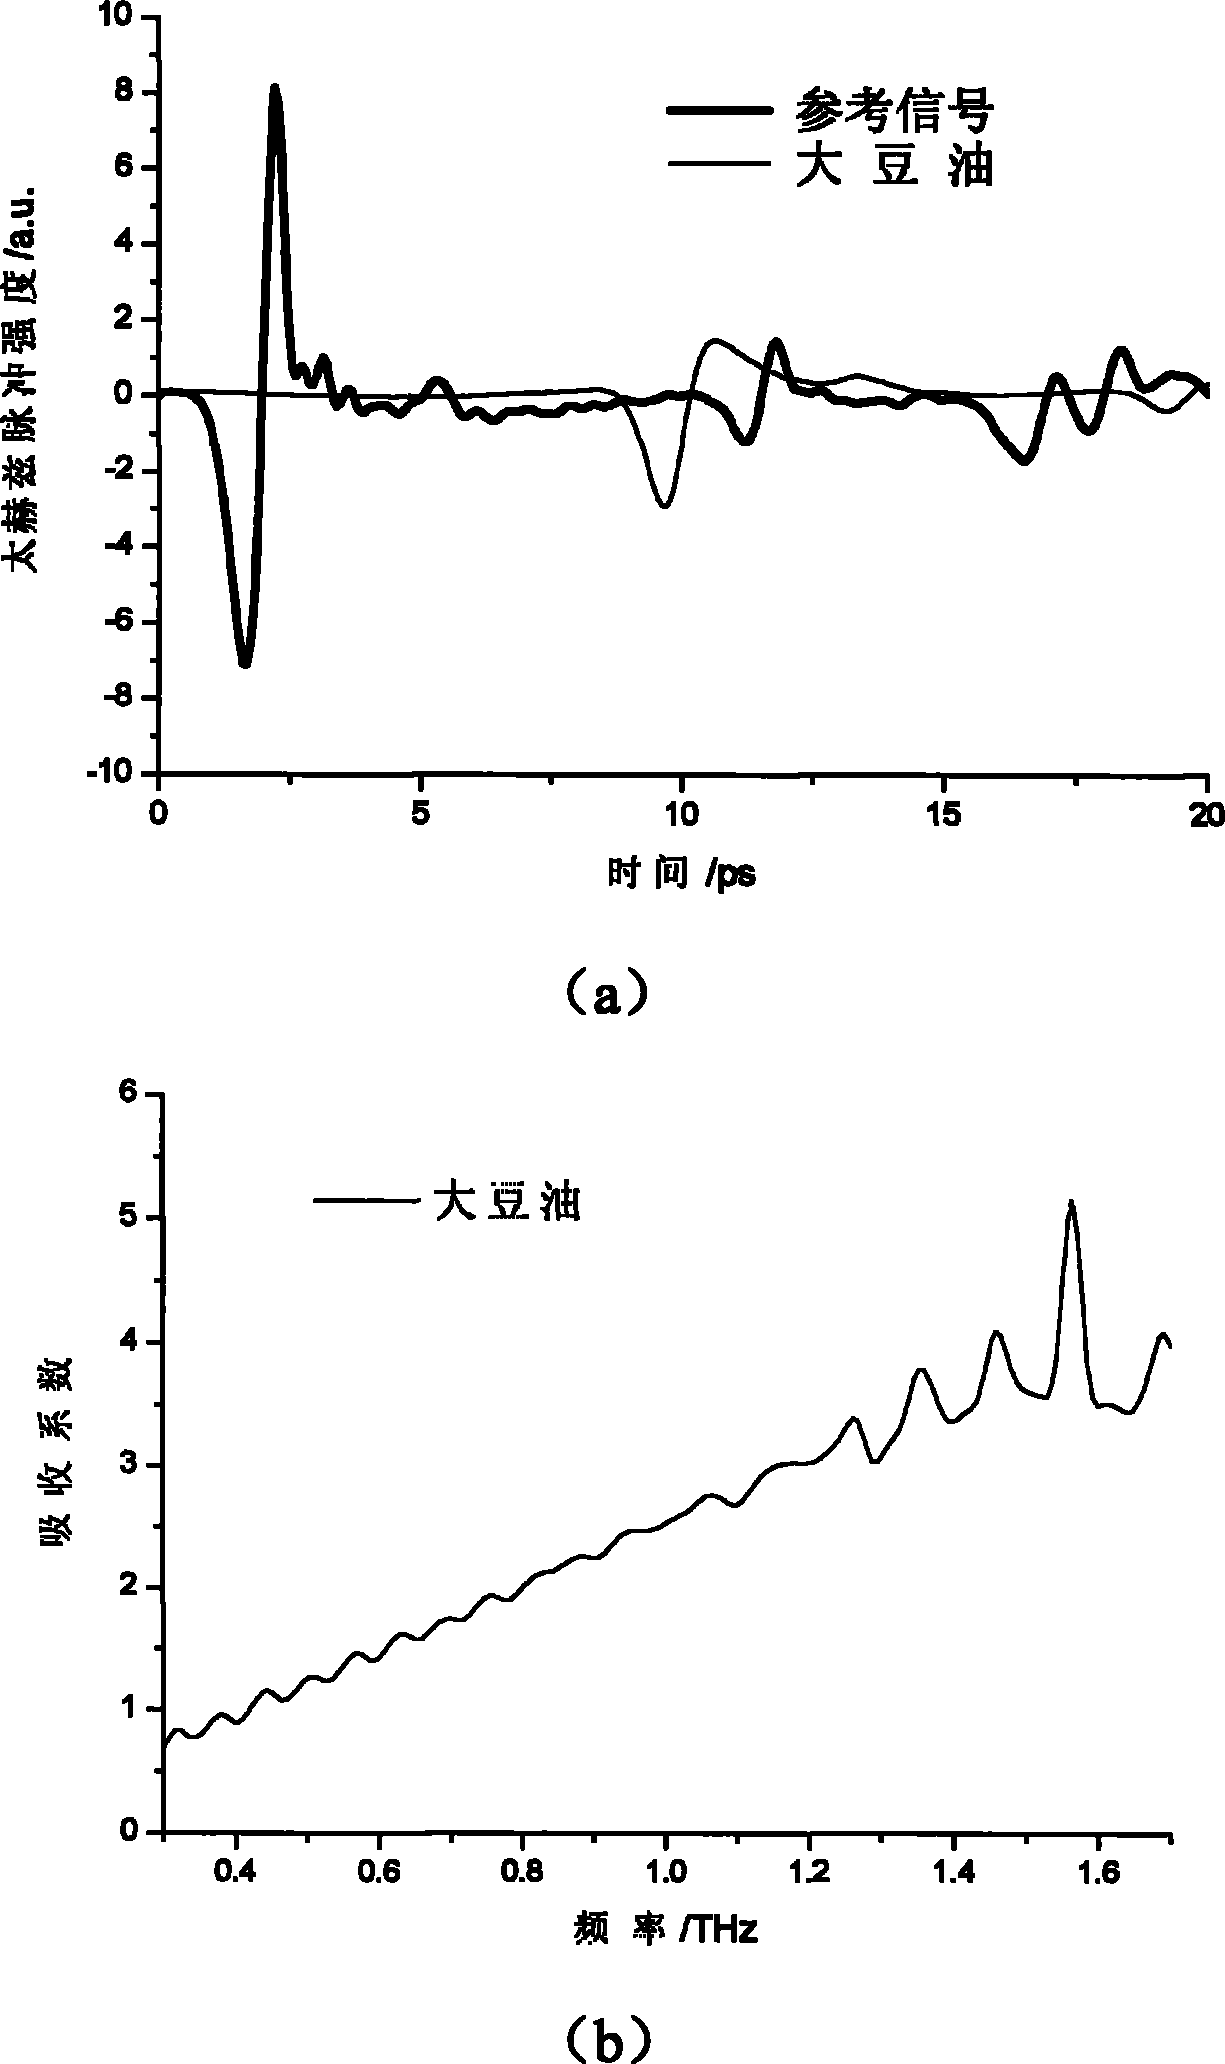 Method for accurately measuring optical parameters of edible oil